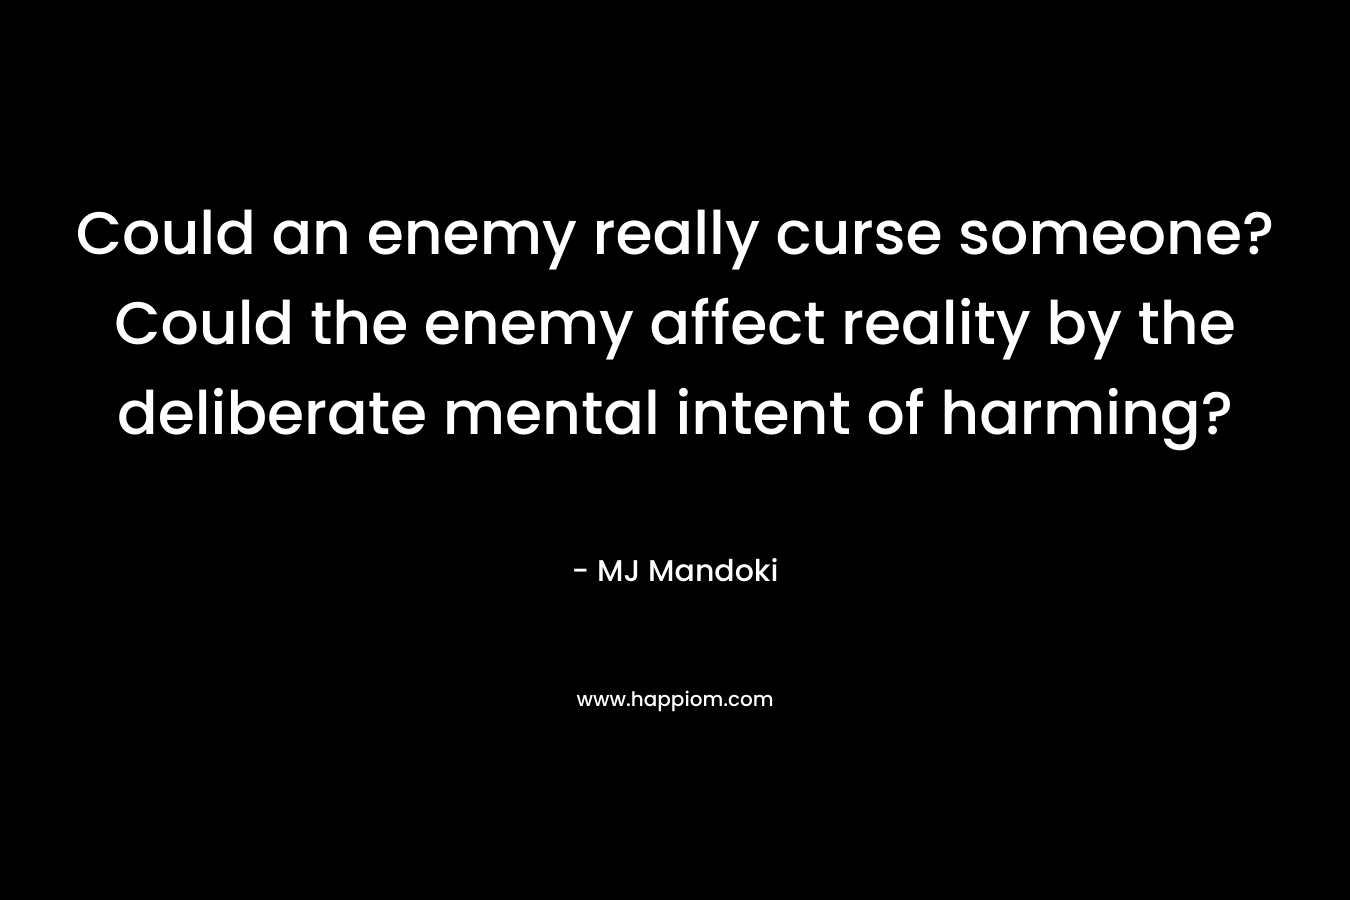 Could an enemy really curse someone? Could the enemy affect reality by the deliberate mental intent of harming?